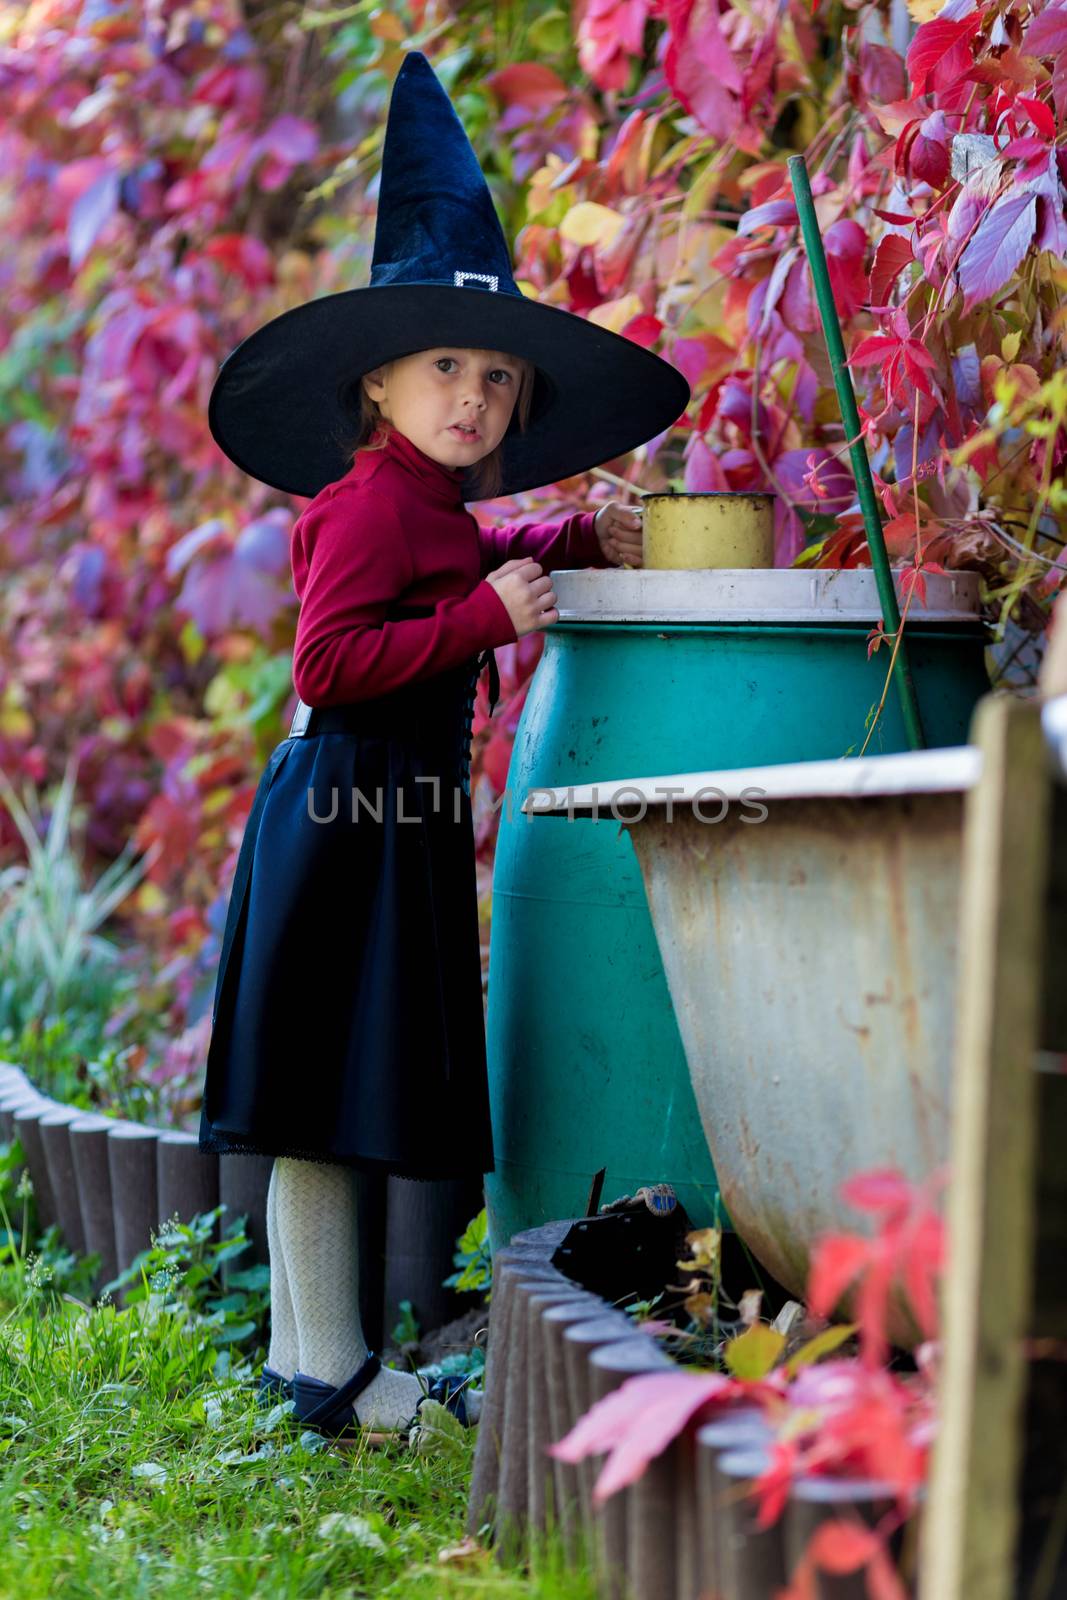 Little girl in a witch costume interferes with a potion on a halloween party by galinasharapova